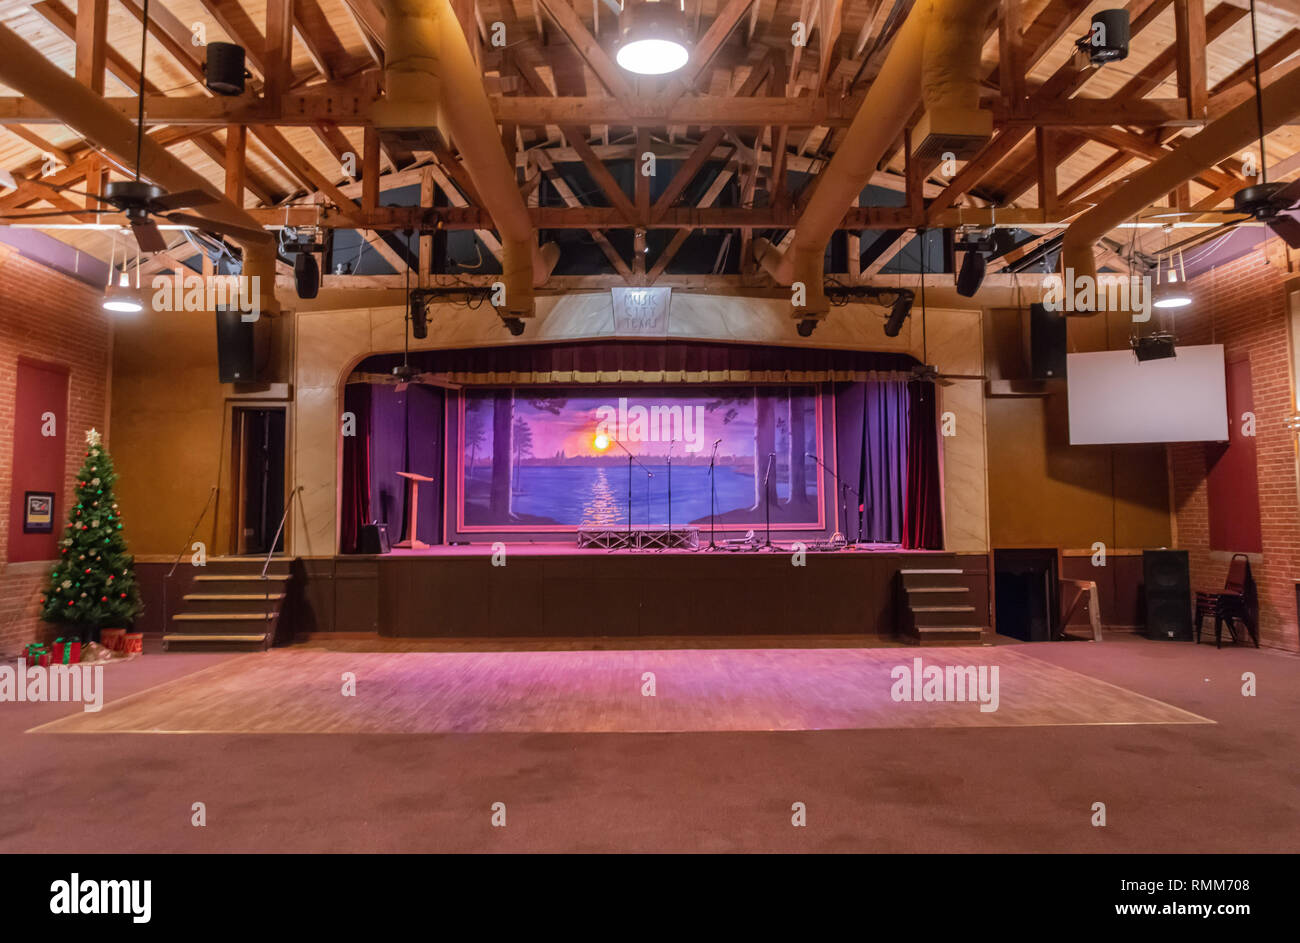 Linden, Texas, United States of America - January 14, 2017. Interior view of Music City Texas Theater in Linden, TX. Stock Photo